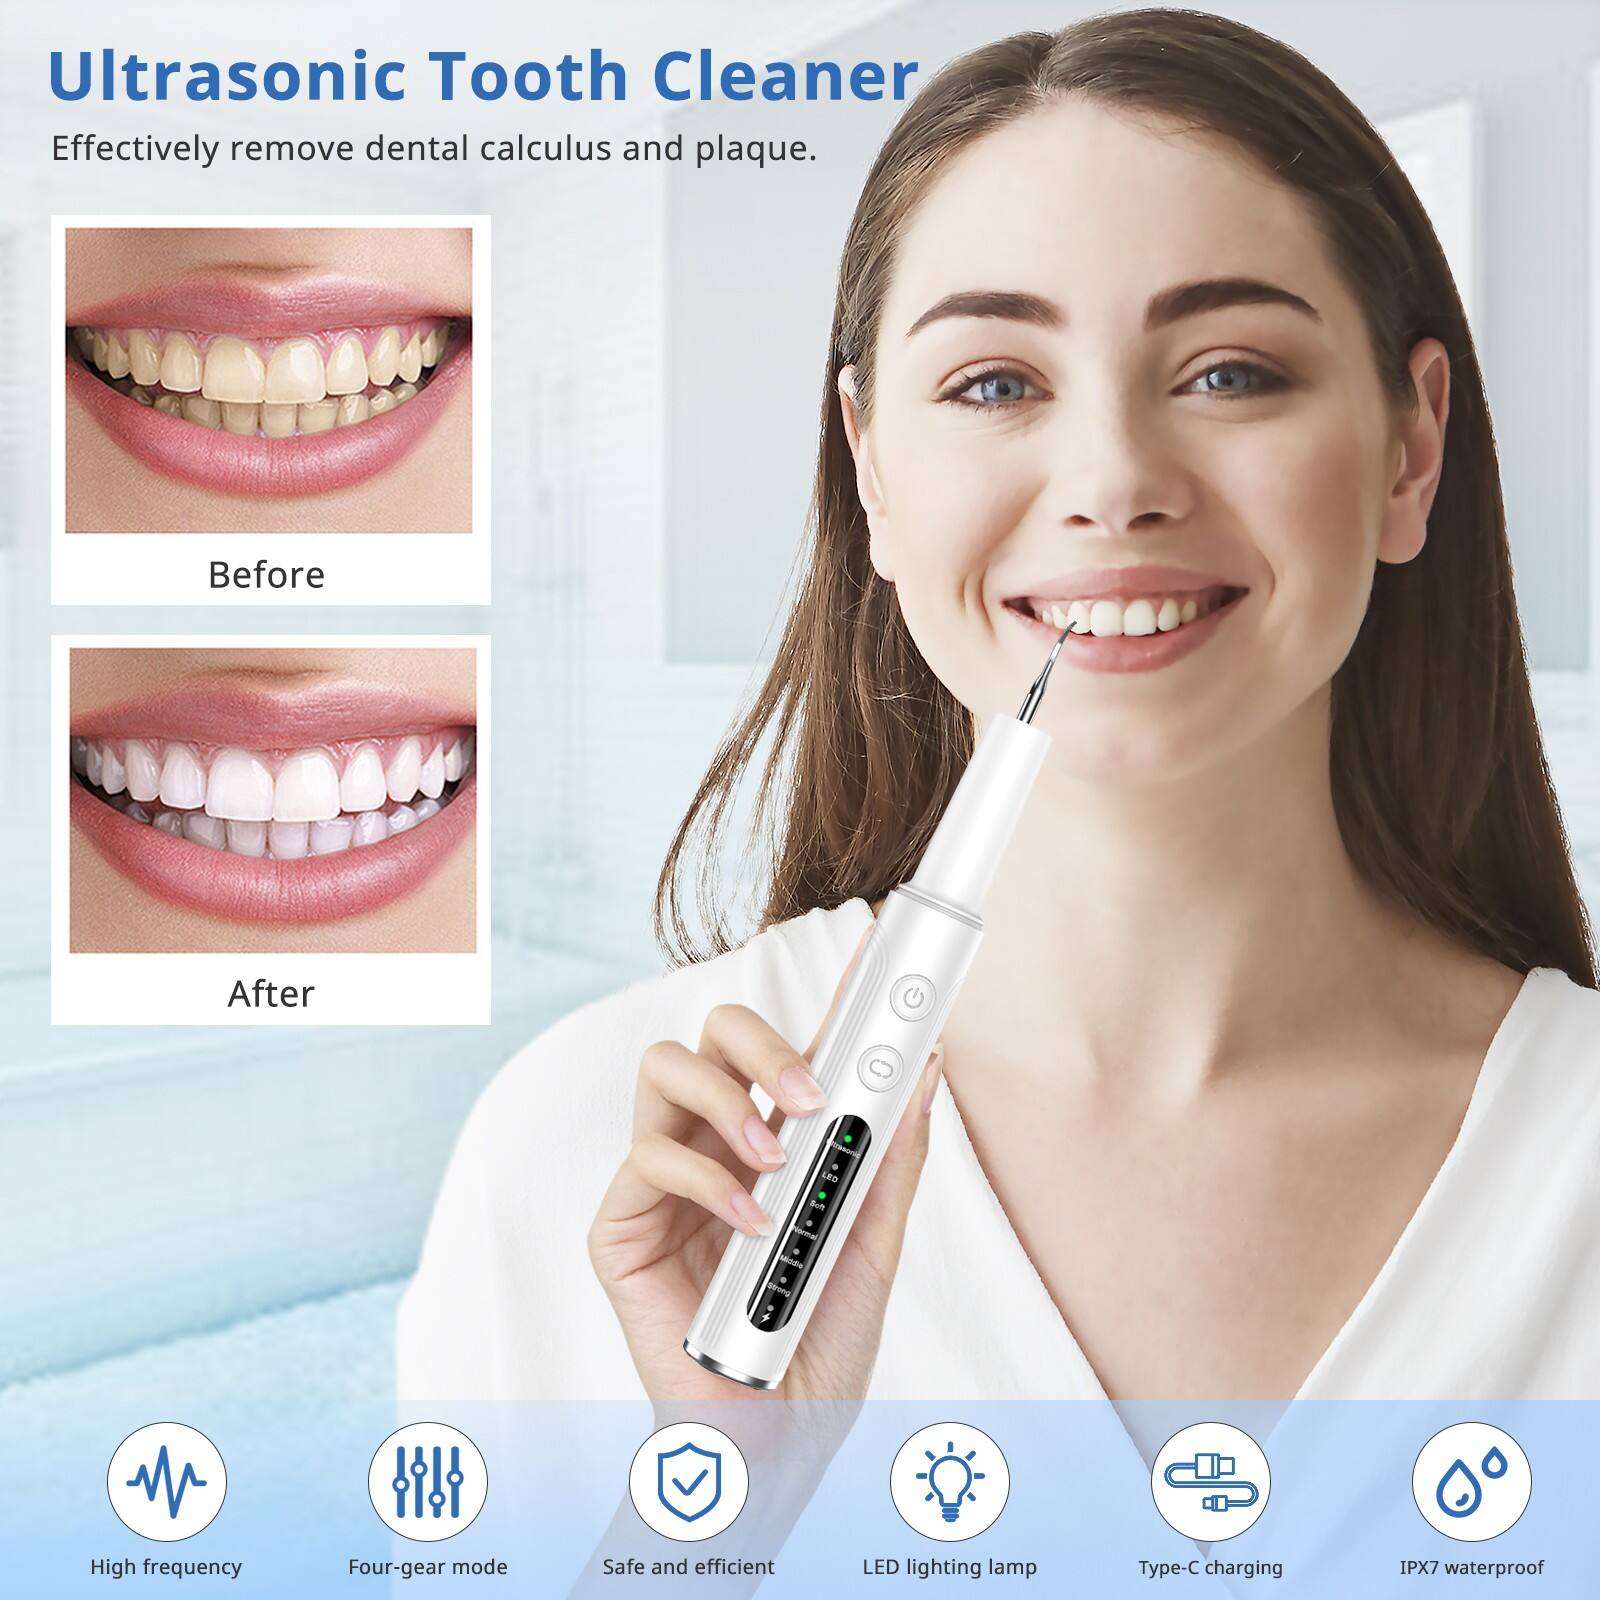 Ultrasonic Tooth Cleaner M191 factory